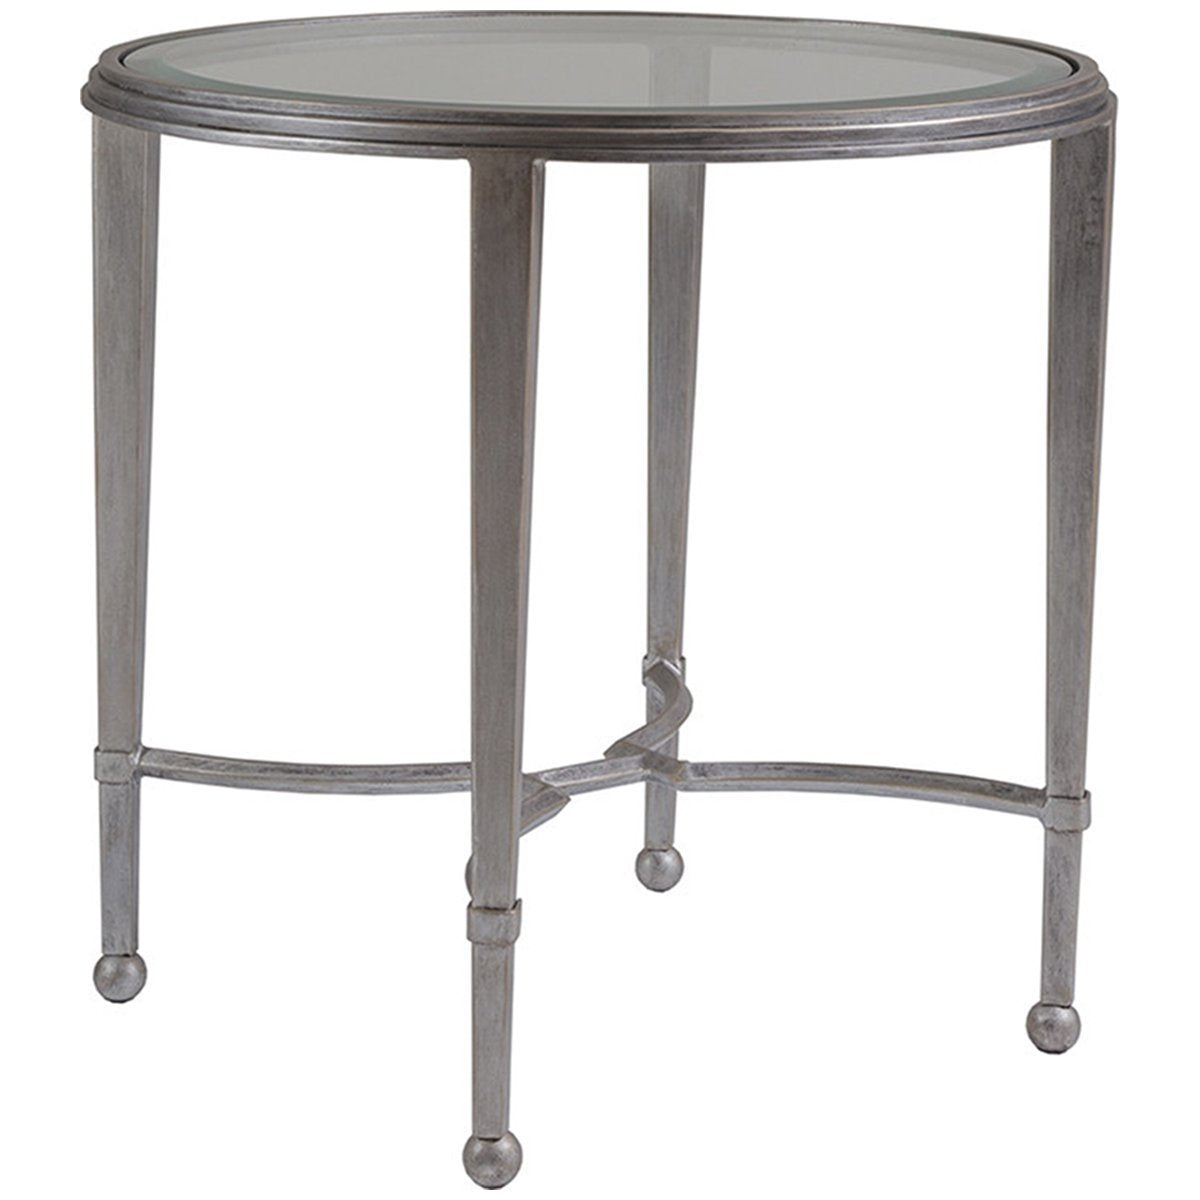 Artistica Home Sangiovese Round End Table 01-2011-950